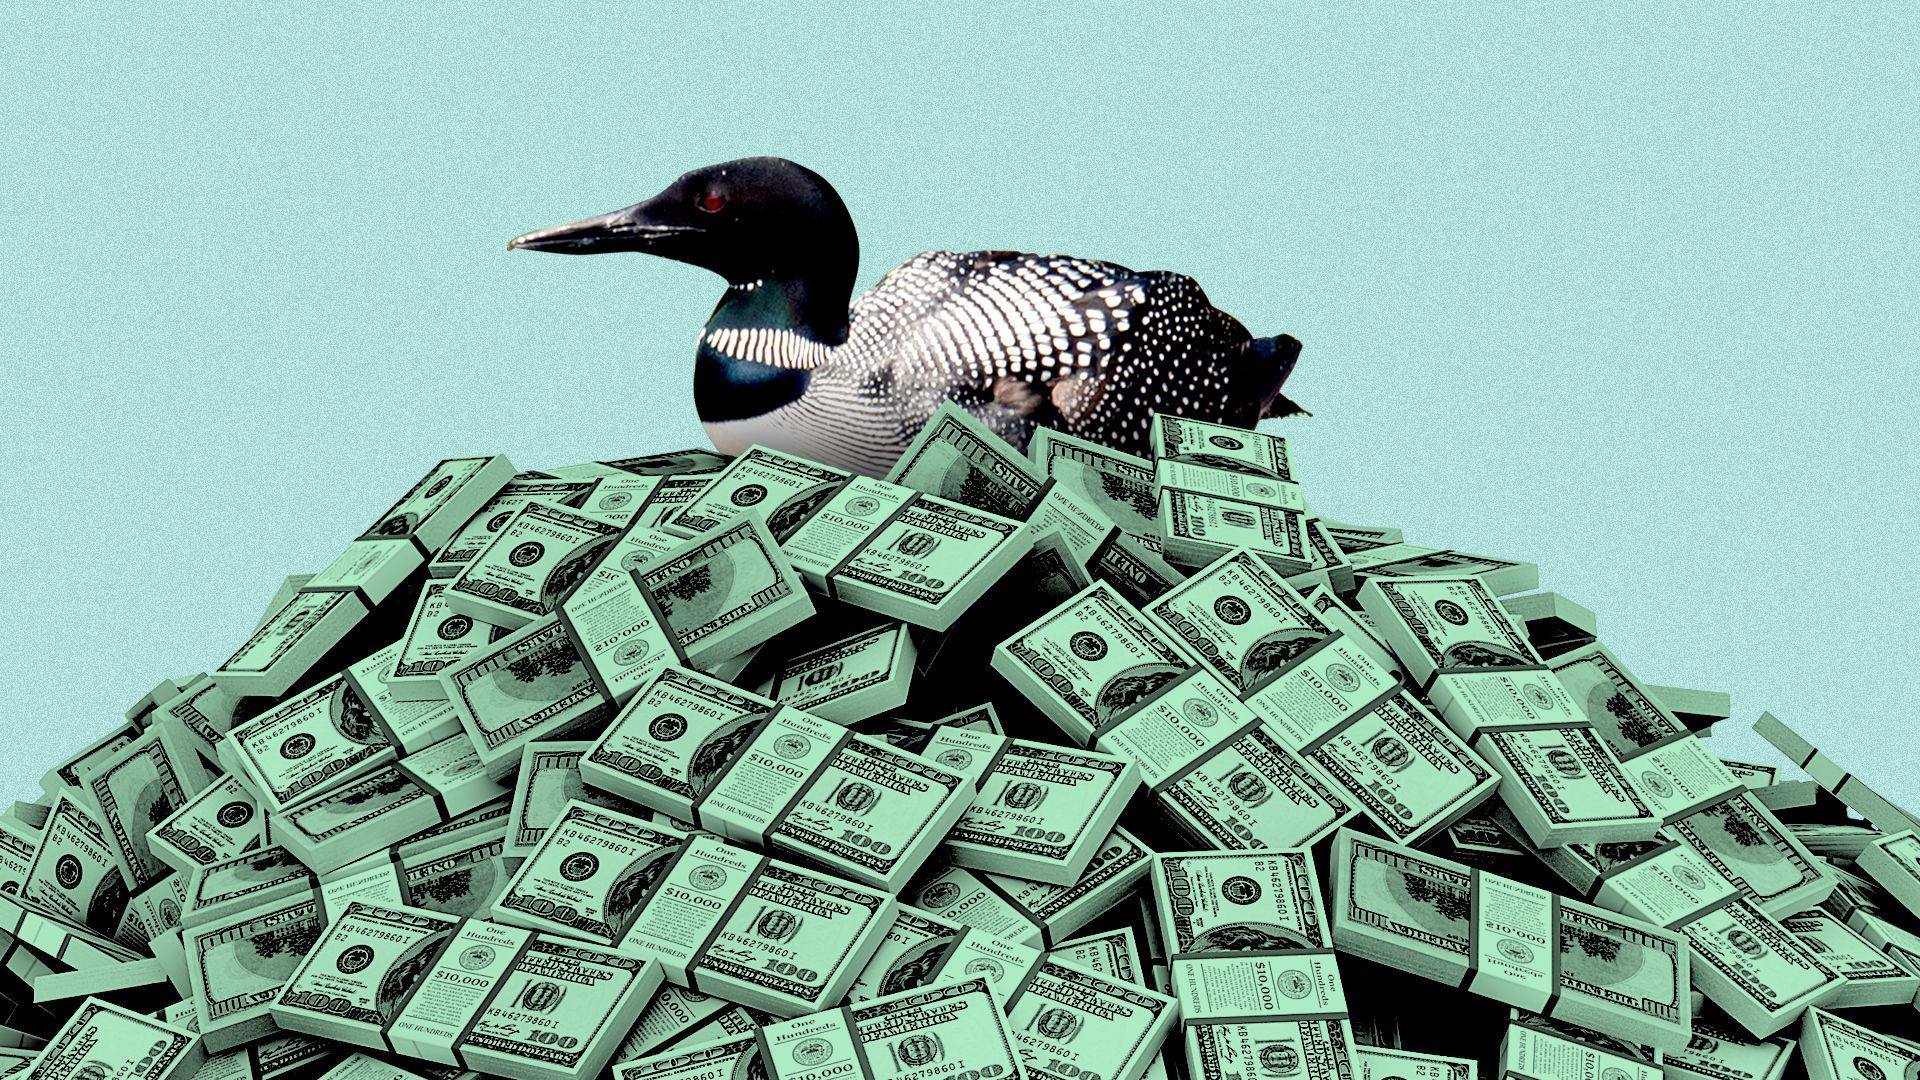 Illustration of a common loon sitting on a pile of cash.